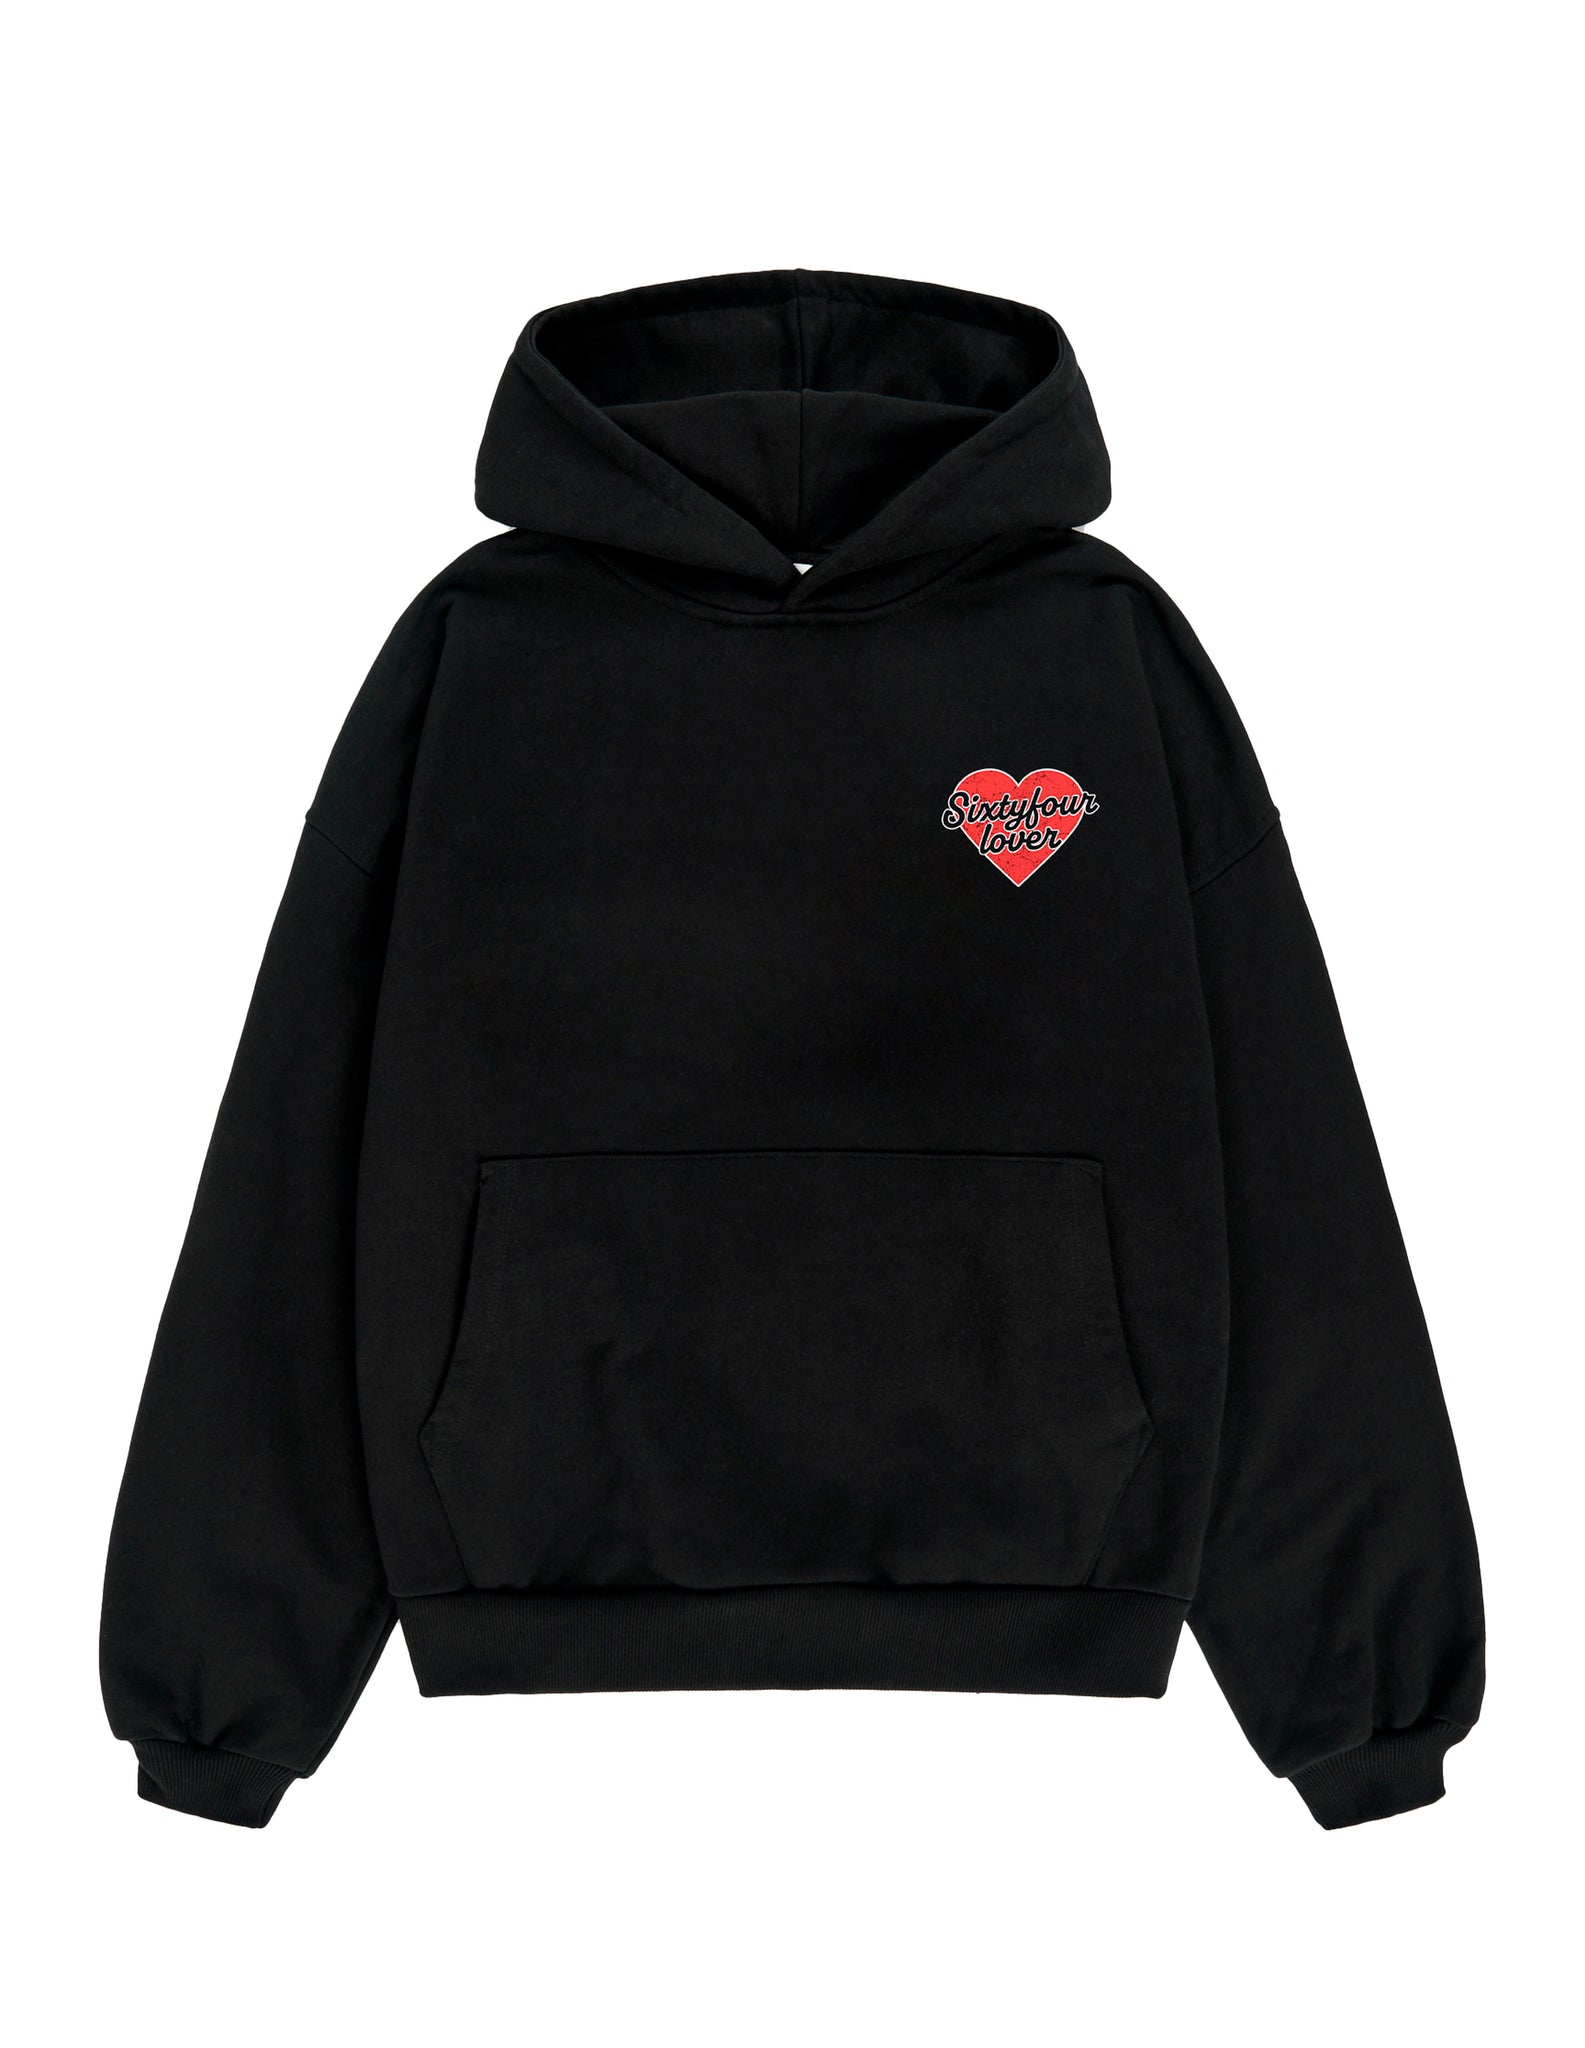 6IXT4OUR LOVER HOODIE